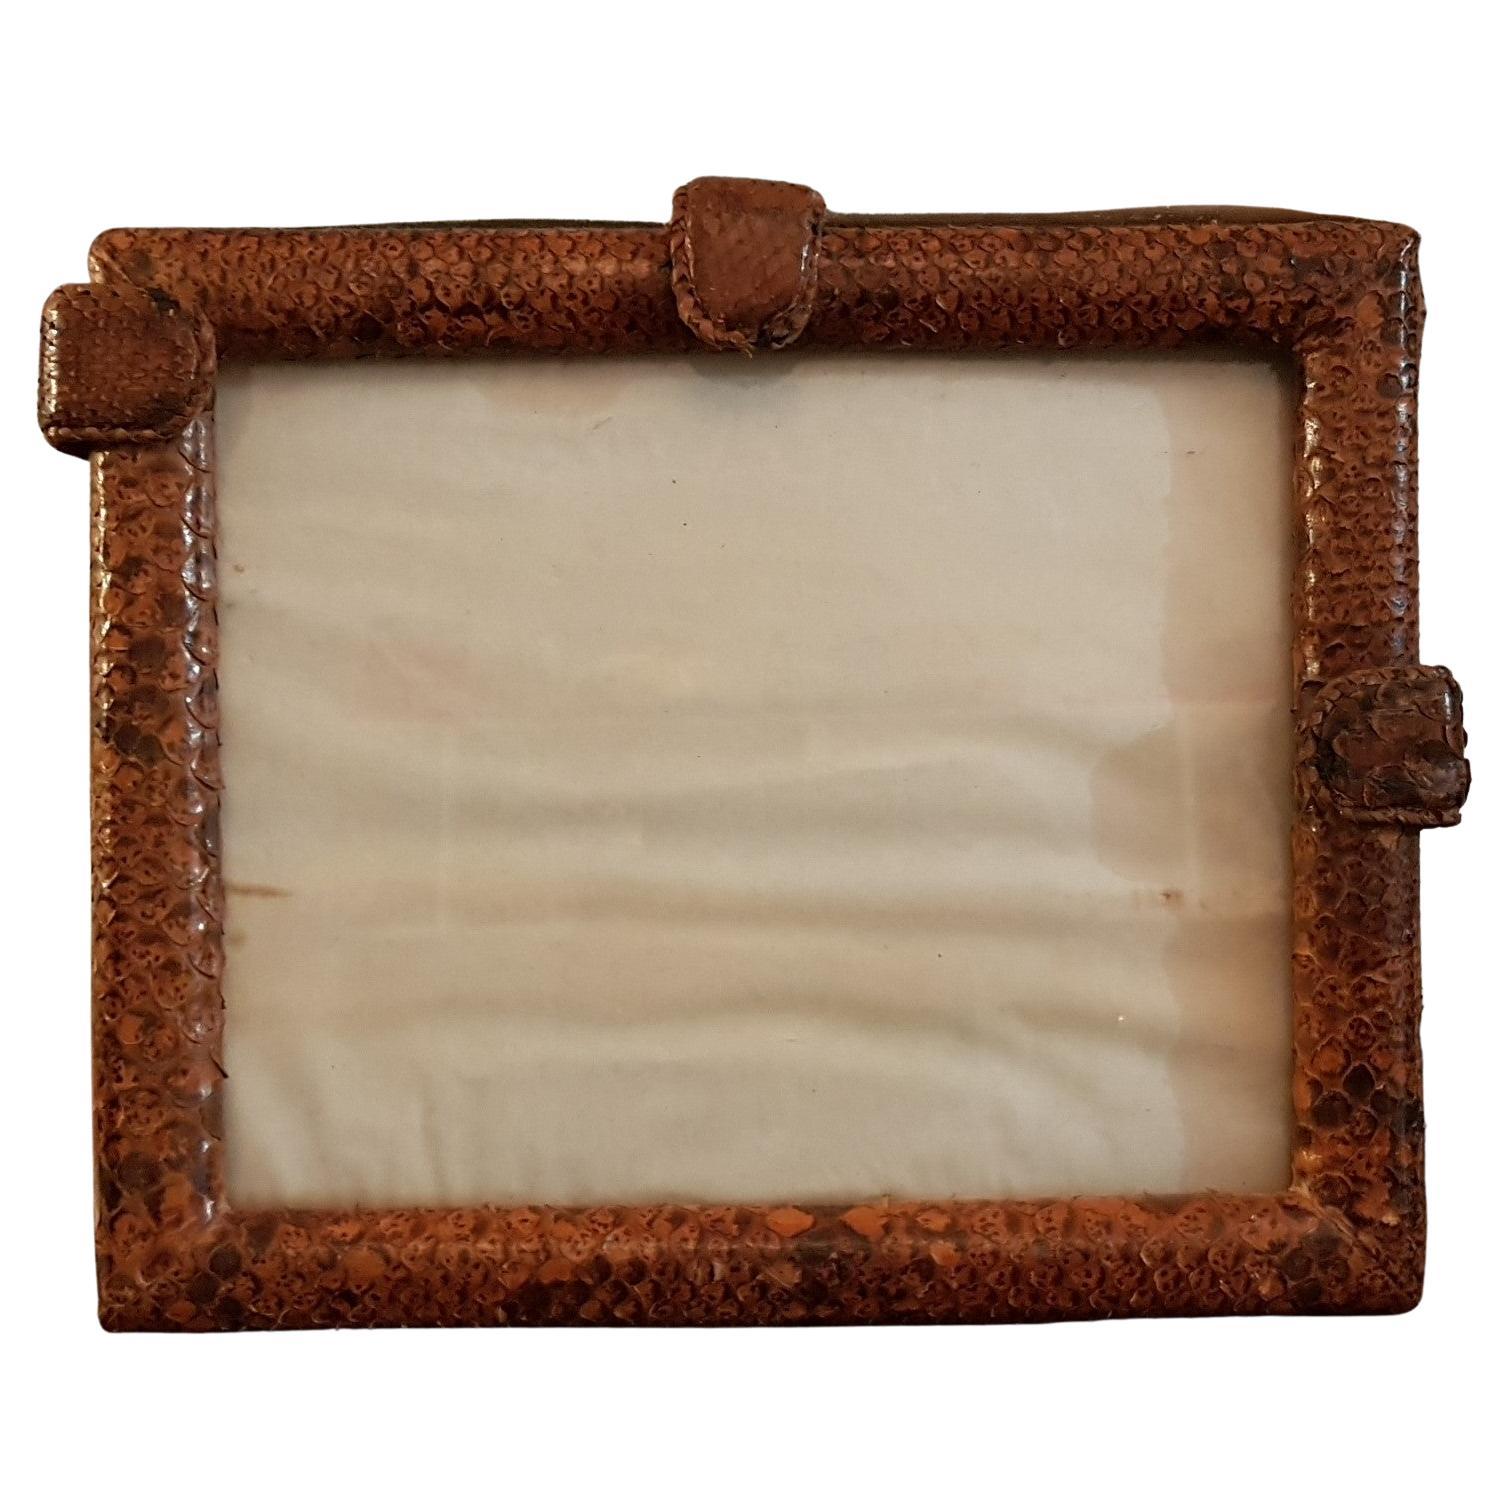 Rare Art Deco French Snakeskin Picture Frame